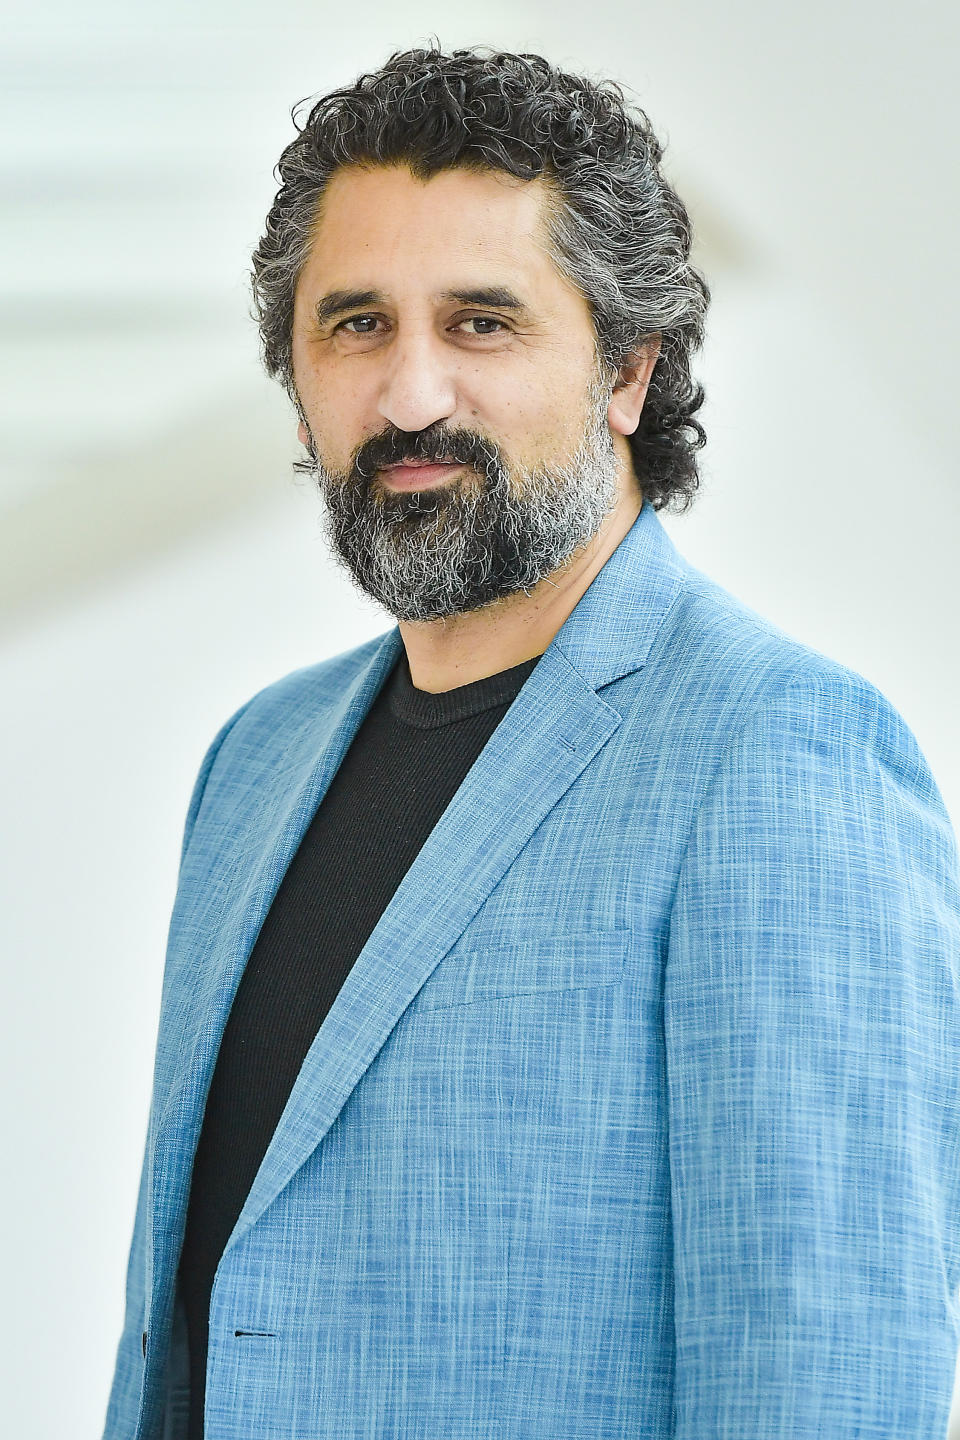 Cliff Curtis in a light blue jacket smiling with a beard